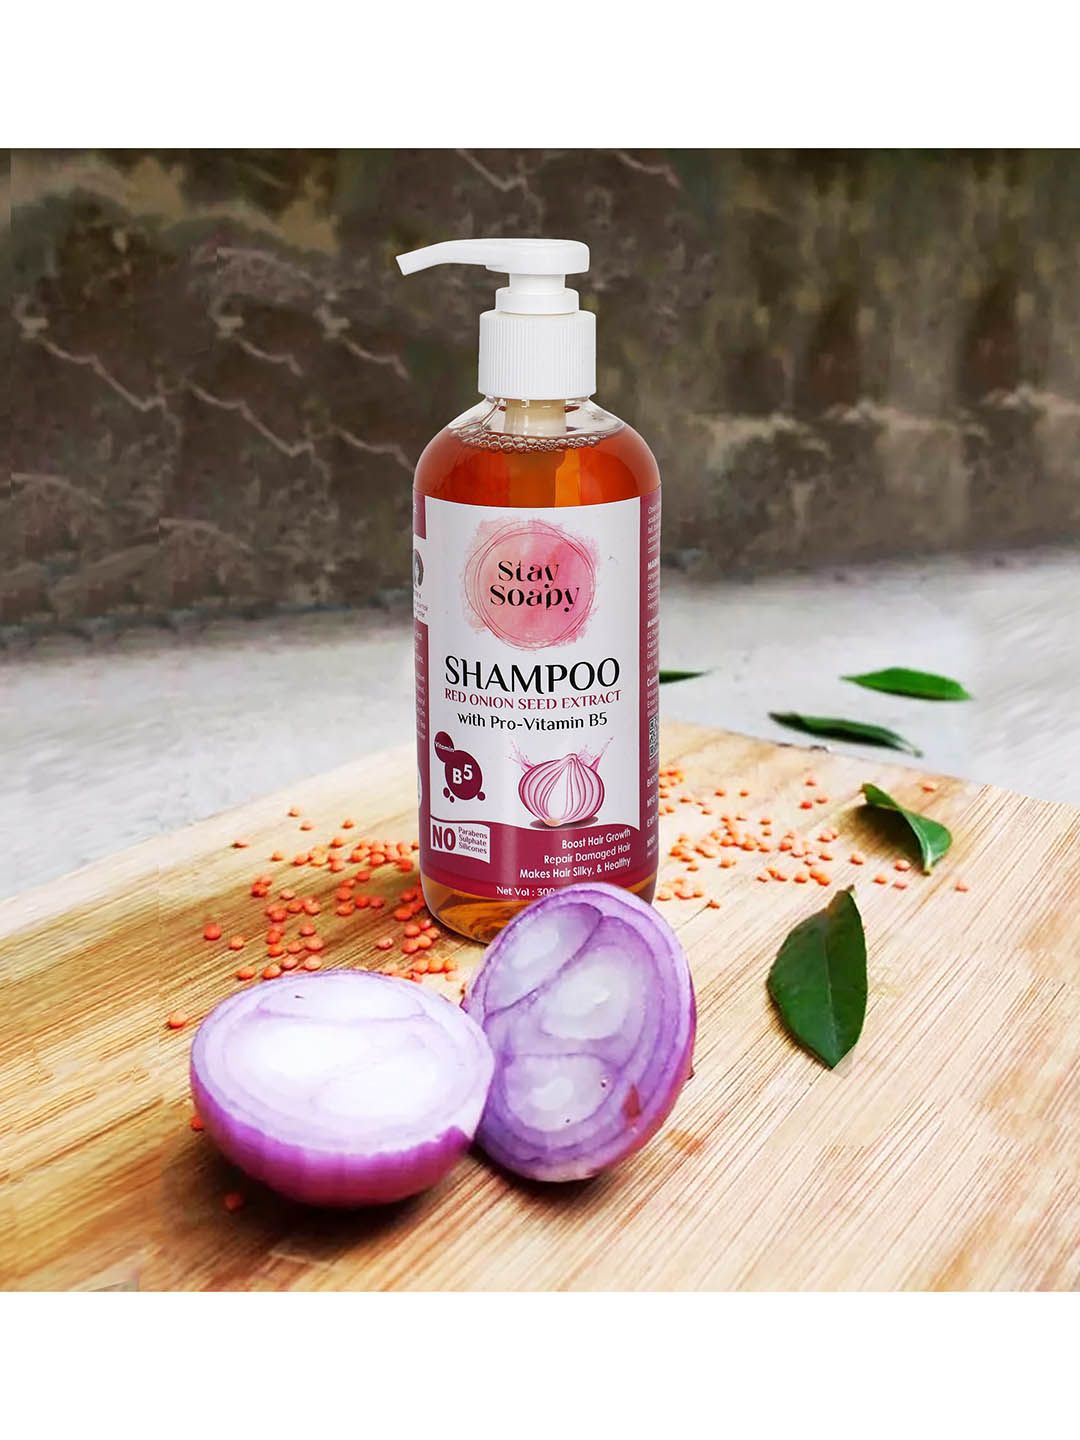 Stay Soapy Red Onion Seed Extract Shampoo with Pro-Vitamin B5 - 300 ml Price in India